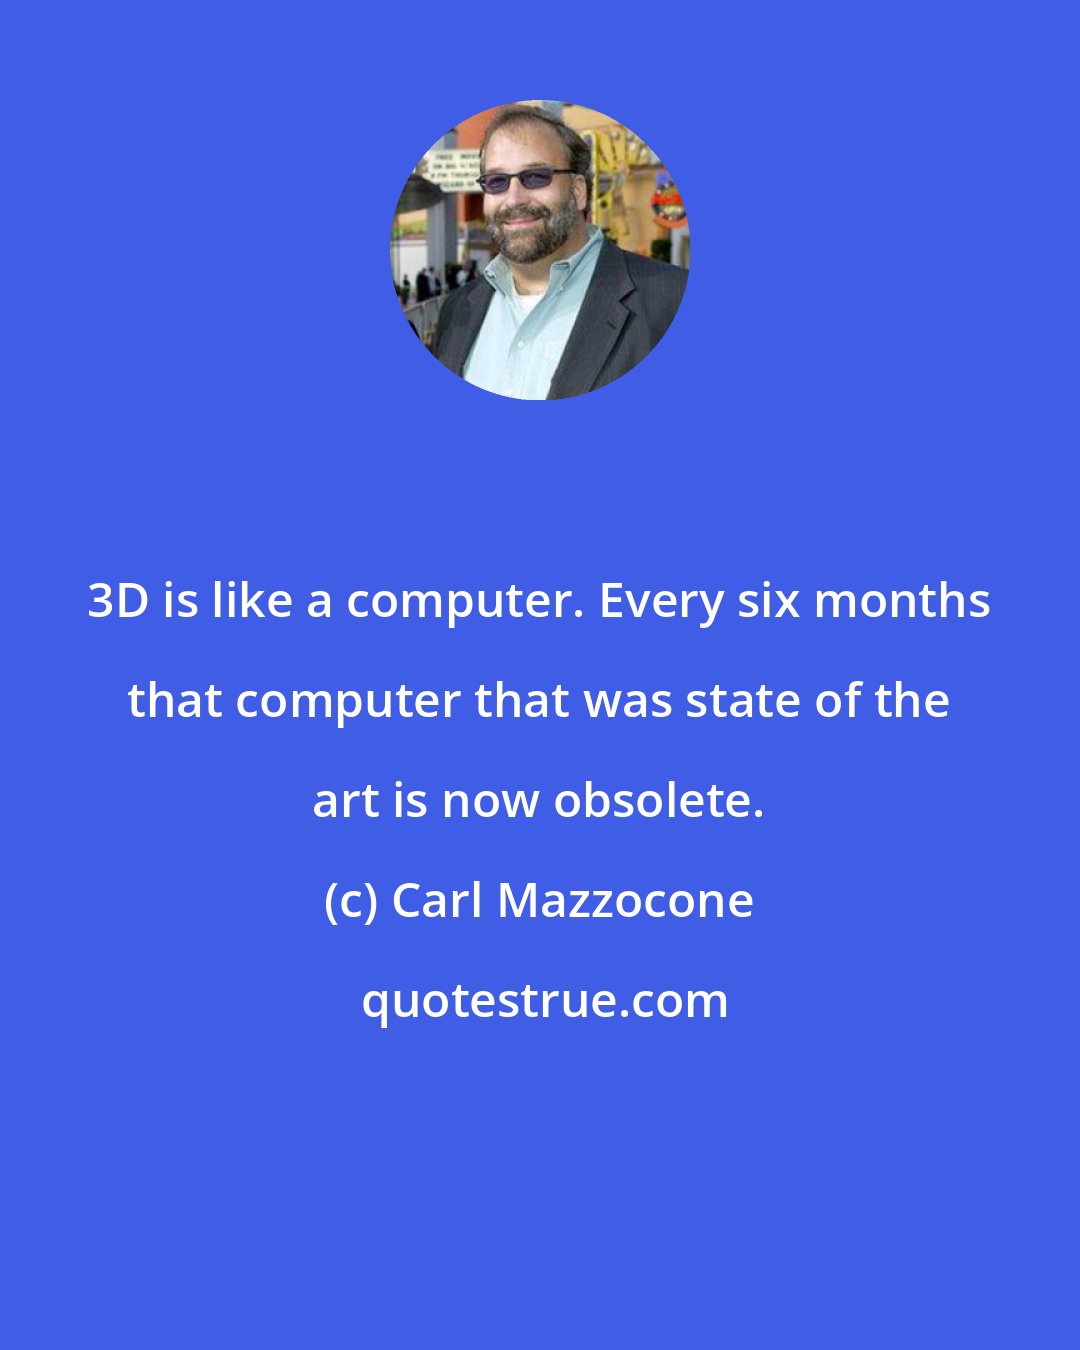 Carl Mazzocone: 3D is like a computer. Every six months that computer that was state of the art is now obsolete.